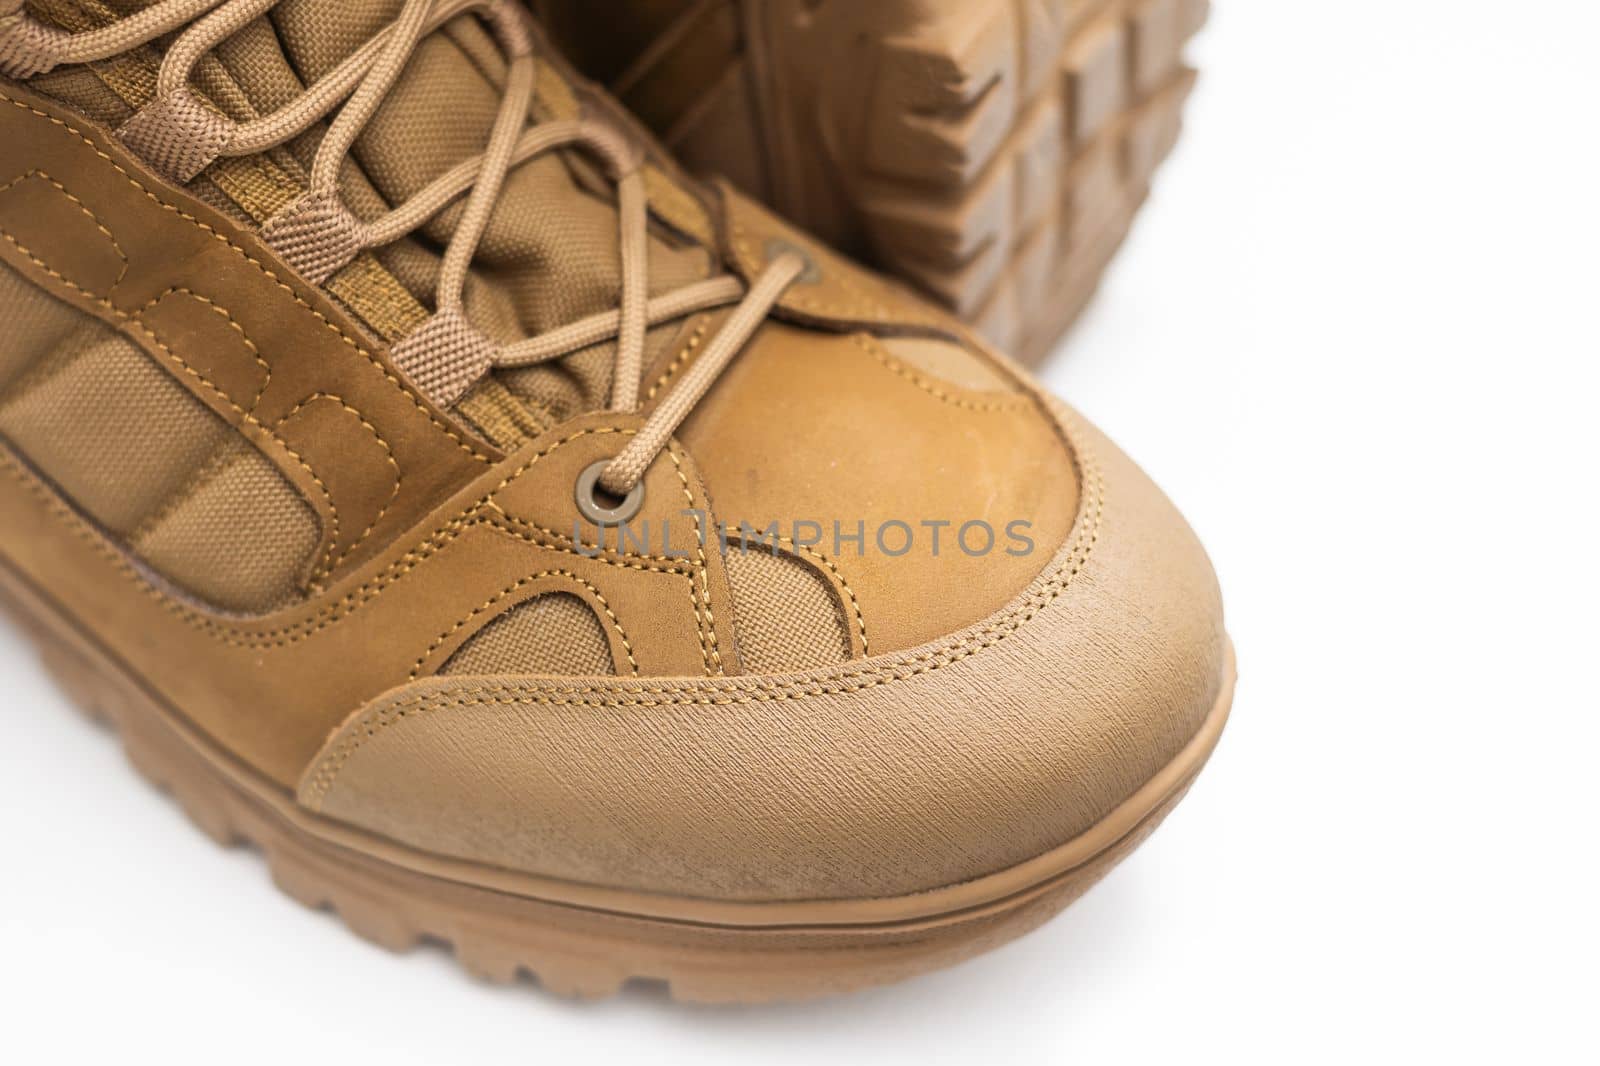 Tactical military boots for the army